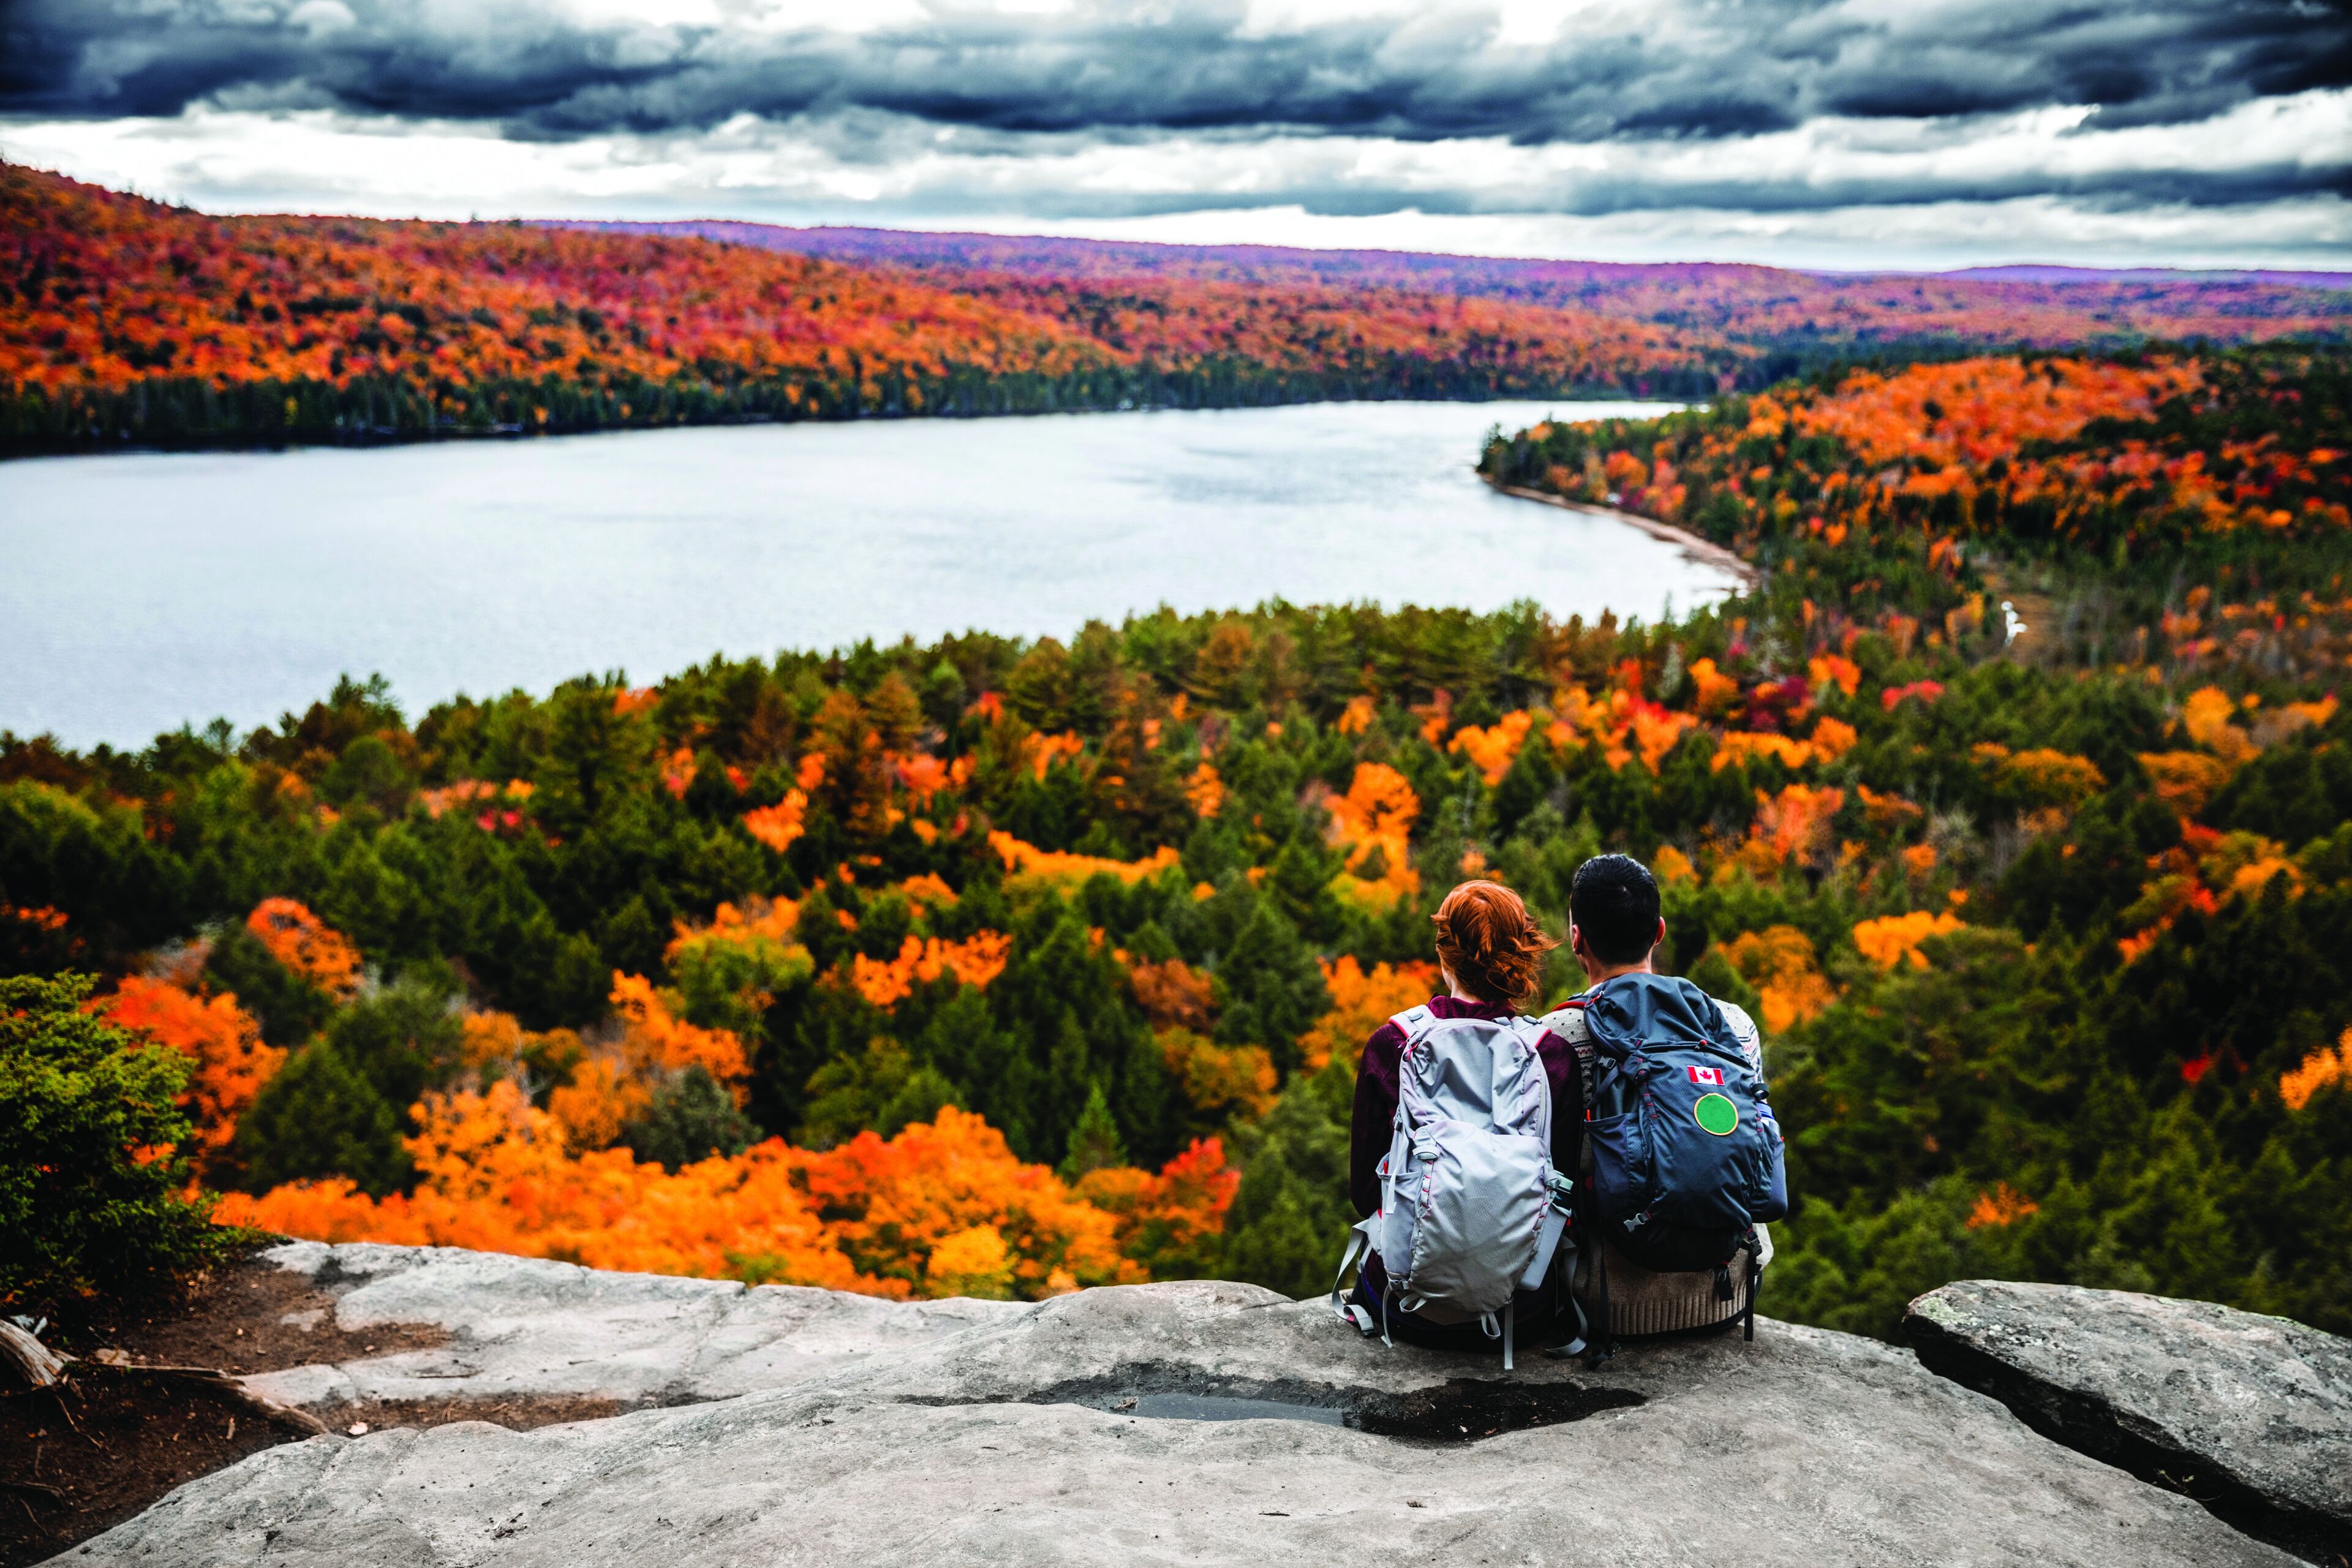 Two hikers sit on a cliff overlooking a stunning autumn landscape filled with fiery foliage by a serene lake, capturing the essence of fall exploration.